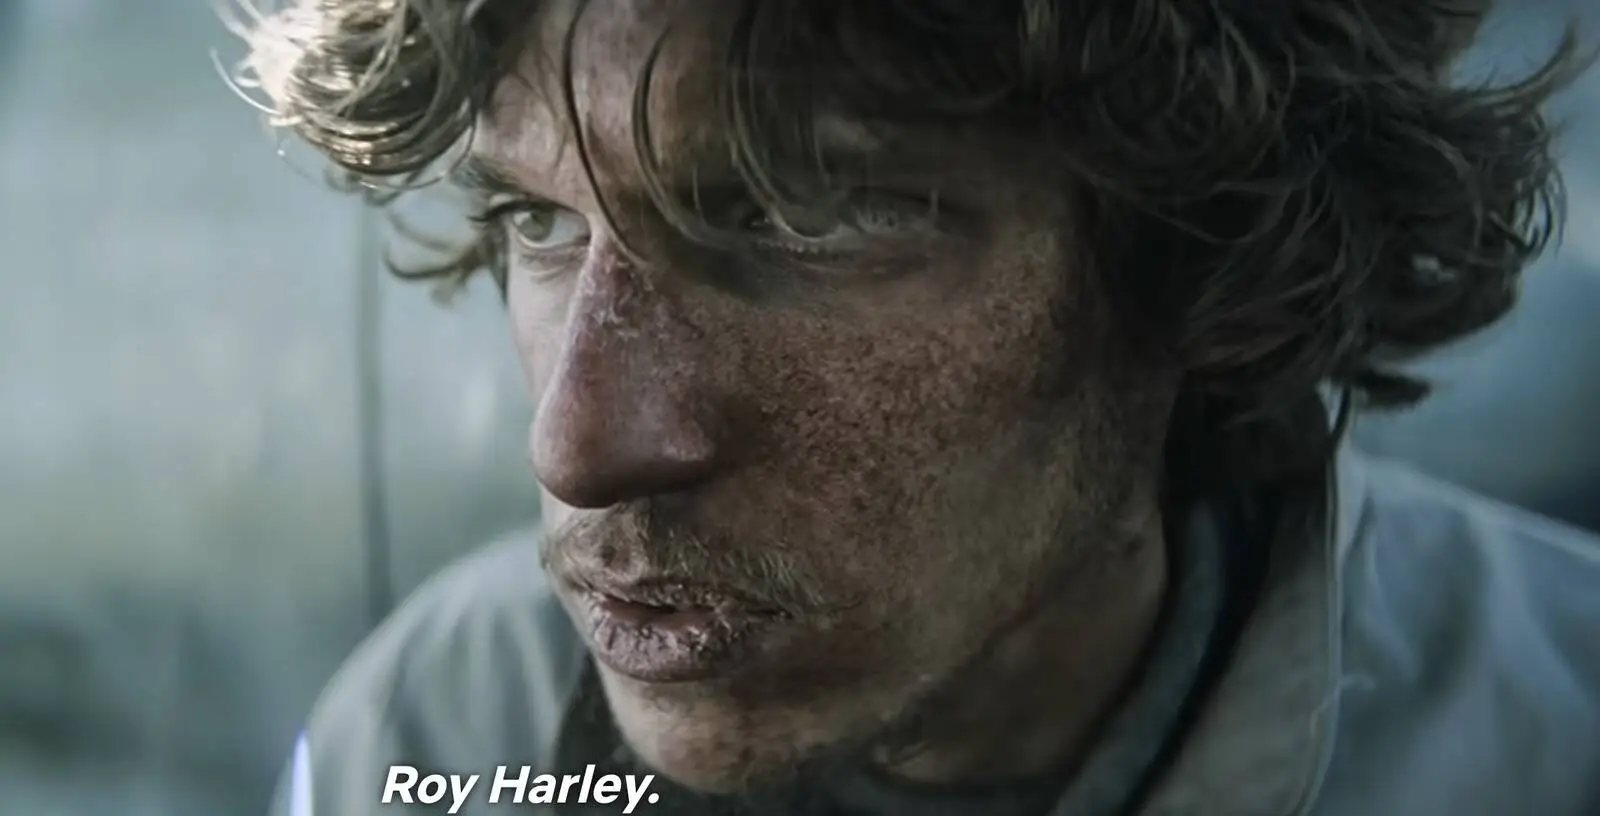 Roy Harley Andes Plane Crash Survivor, Real Image, Where Is He Now?